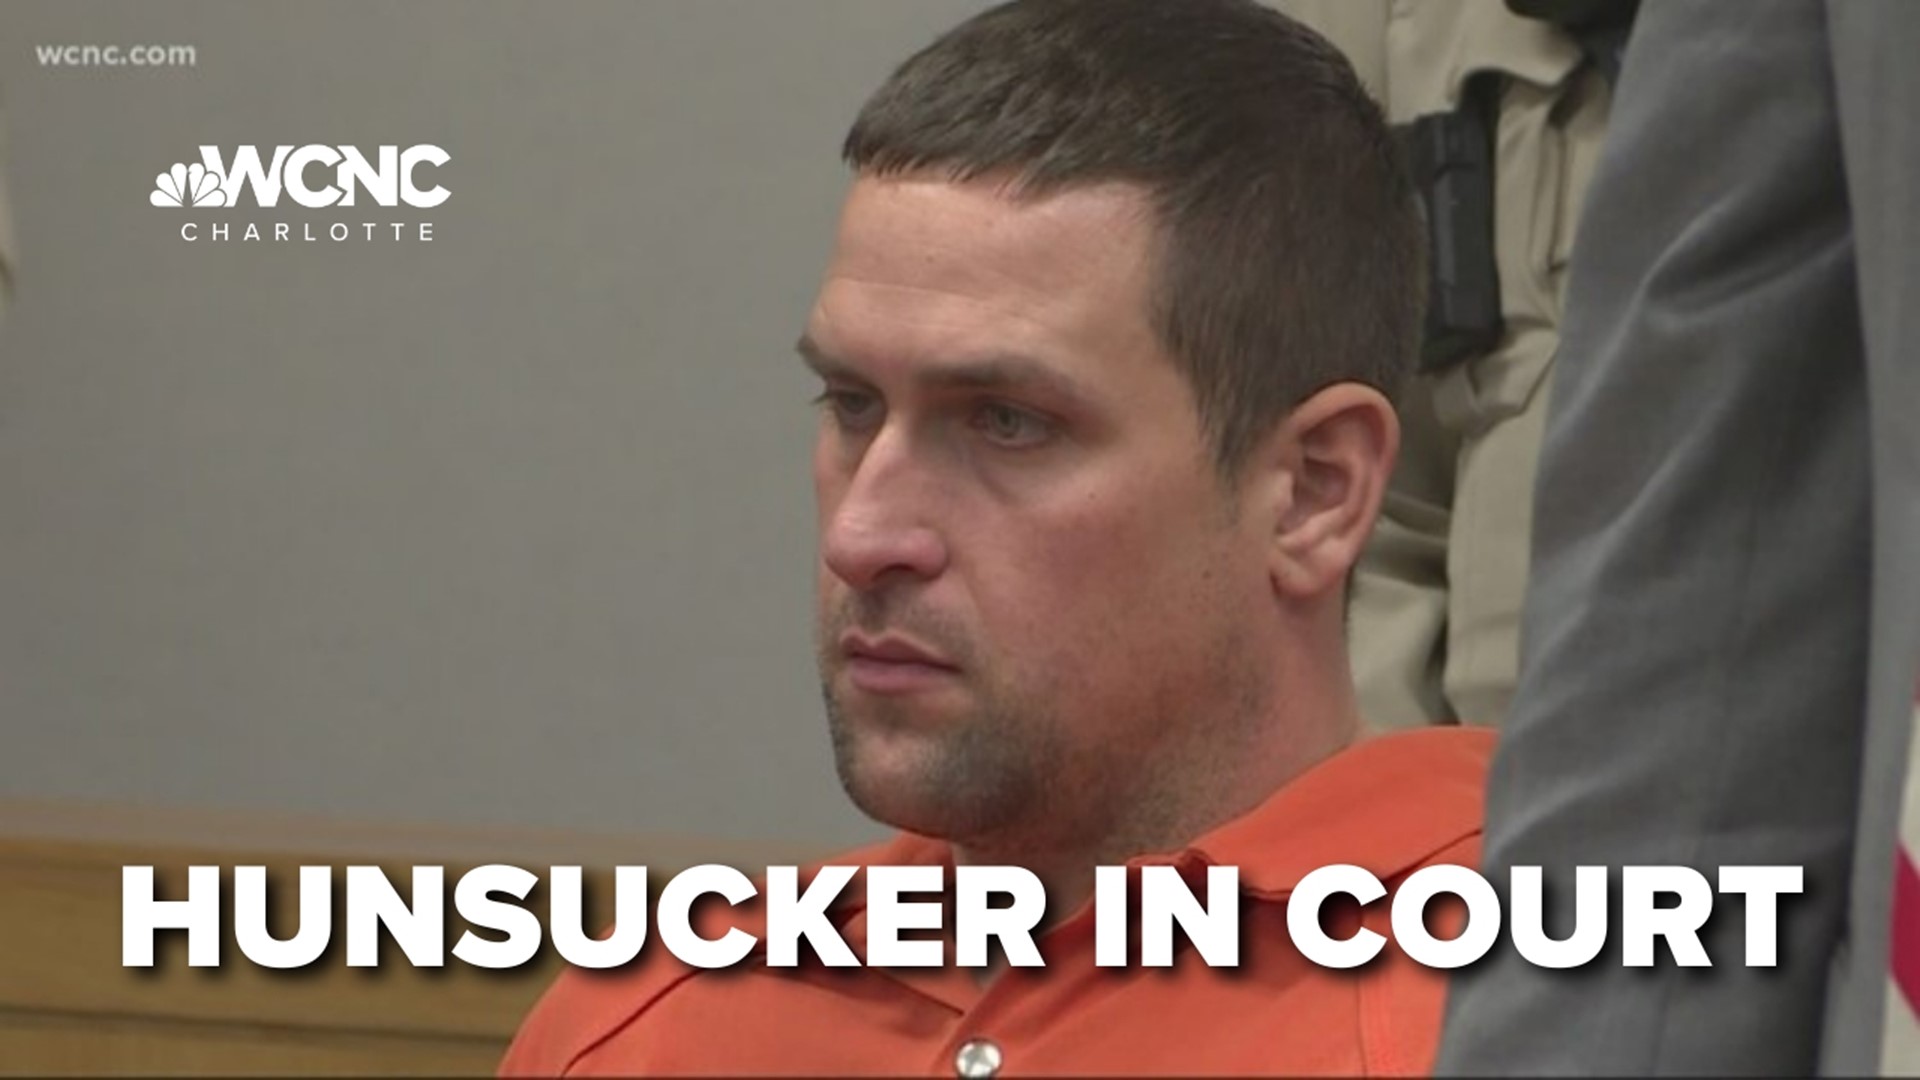 The defense for Joshua Hunsucker, a former paramedic accused of poisoning his wife with eye drops in 2018, was given 60 days to test key evidence in the case.